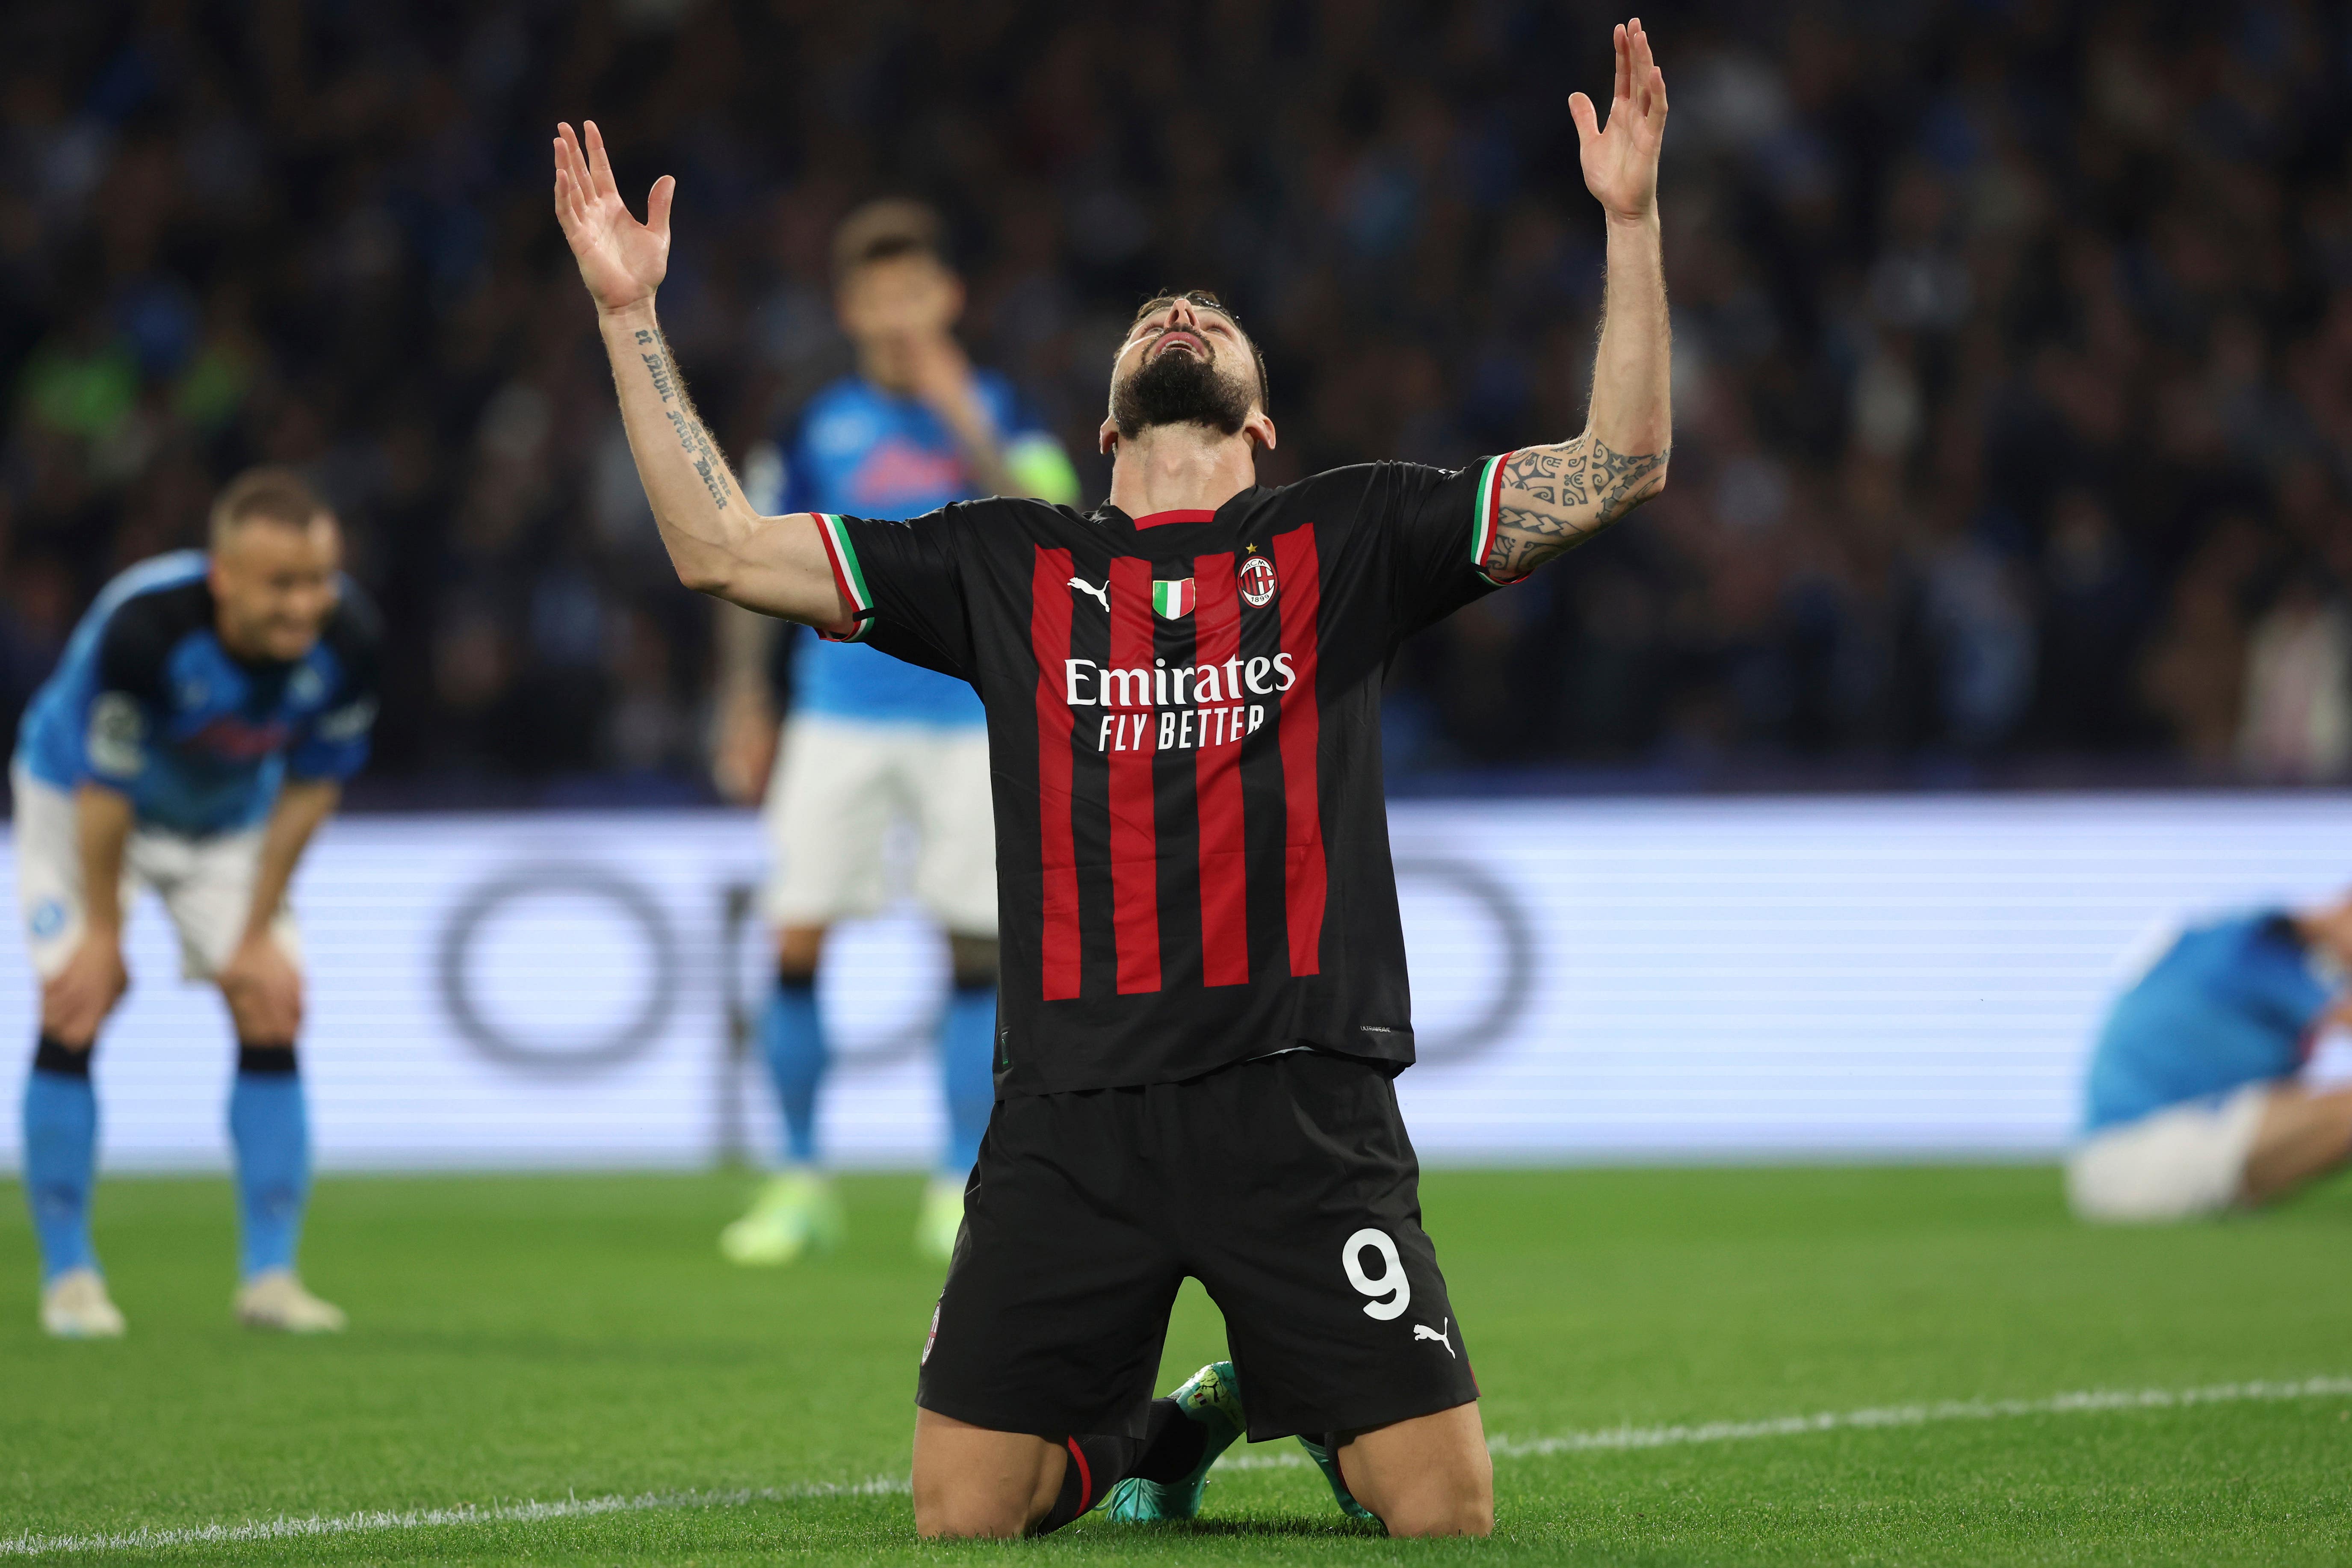 AC Milan make it to League semi-finals at expense of Napoli | The